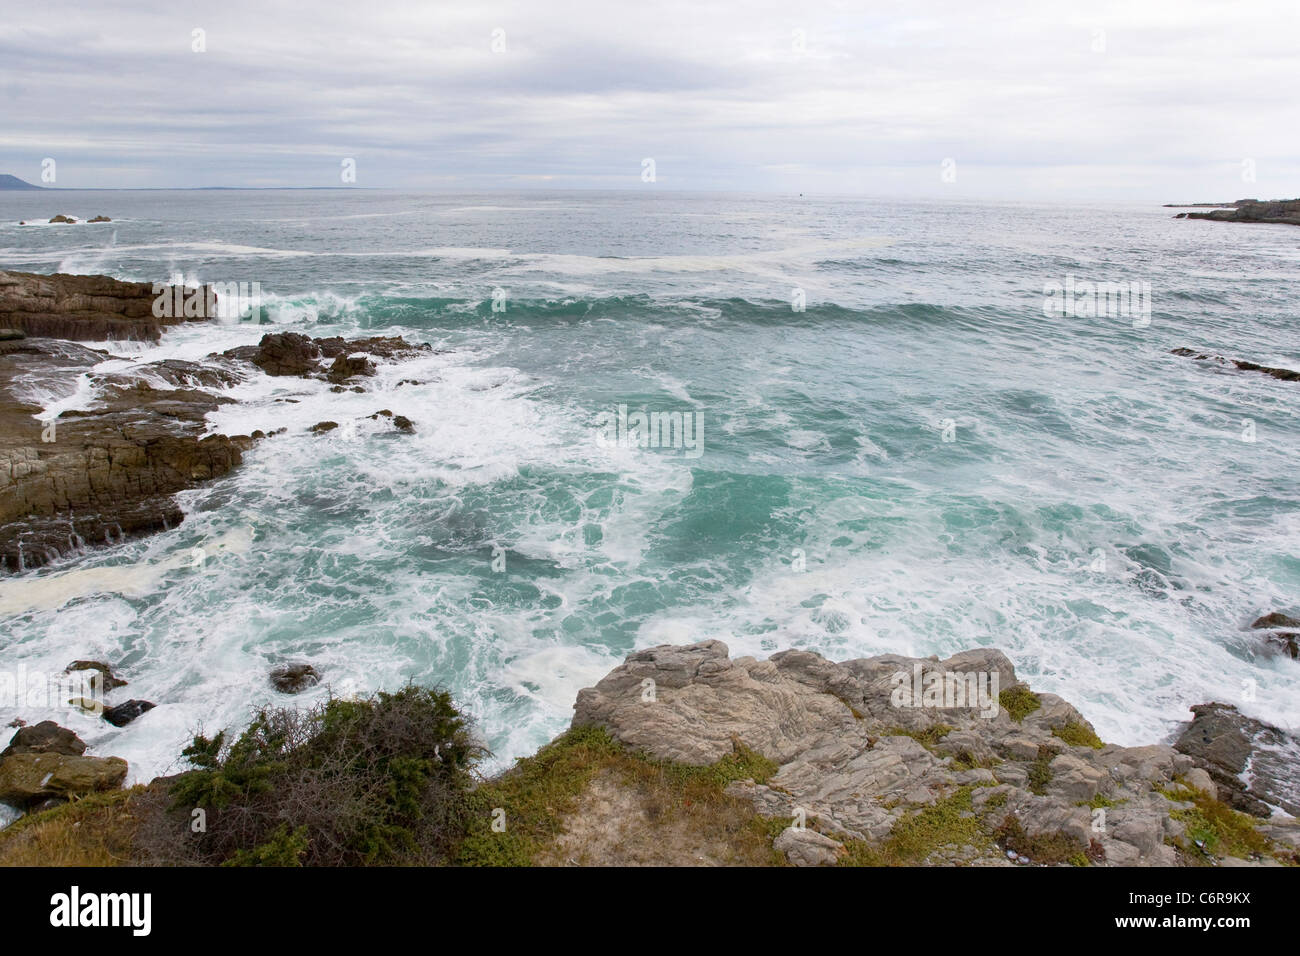 View over the ocean and rocky coastline at Hermanus Stock Photo